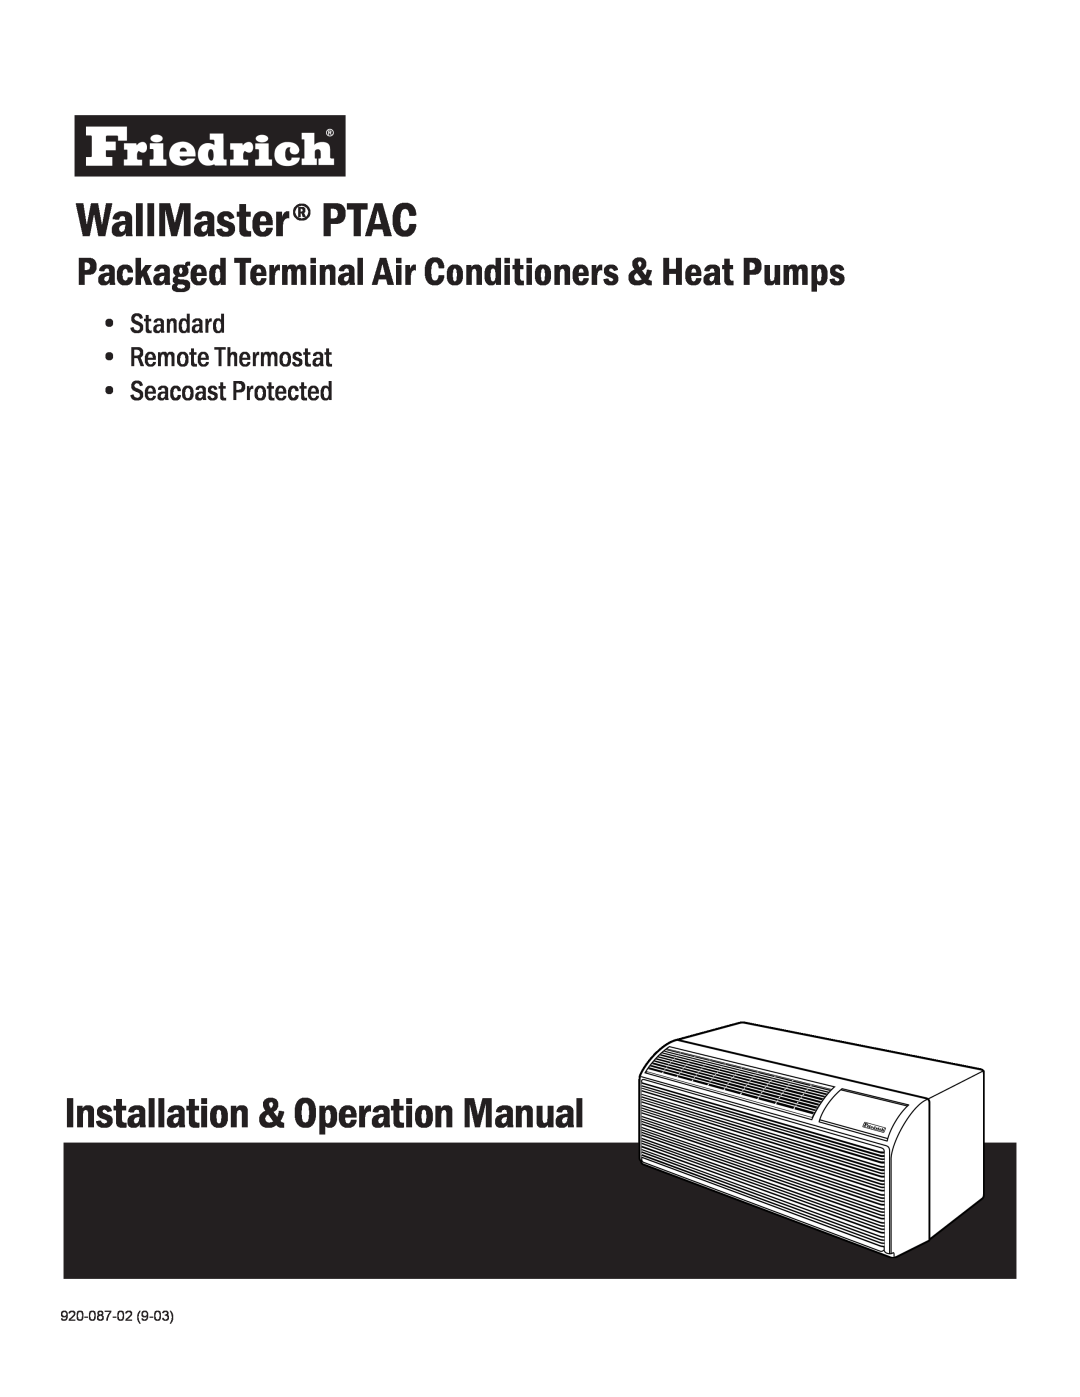 Friedrich operation manual Standard Remote Thermostat Seacoast Protected, WallMaster PTAC 